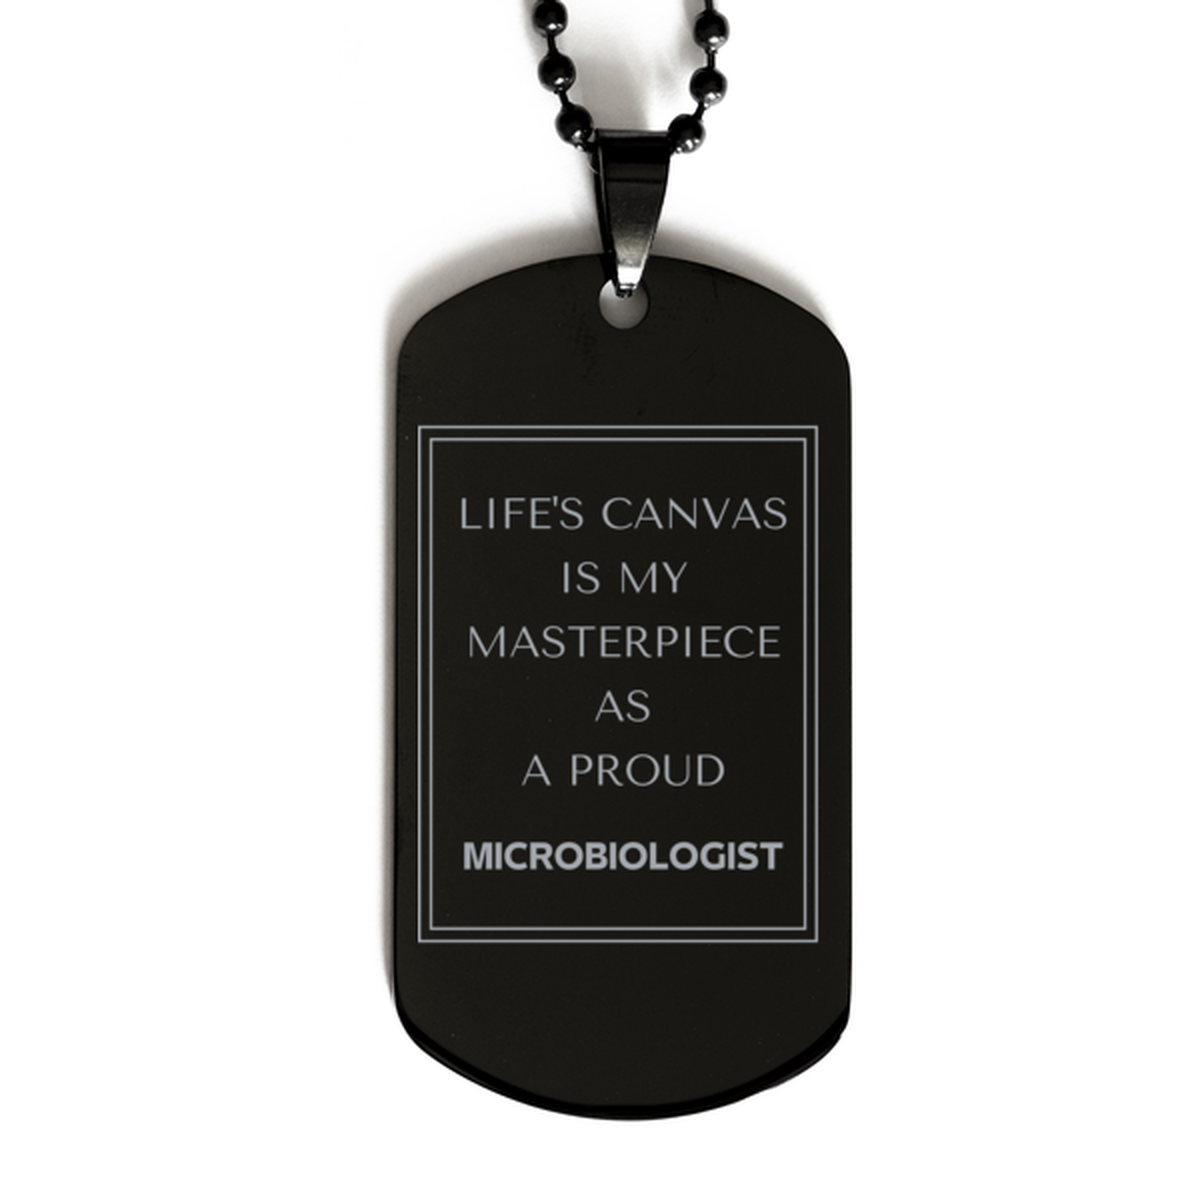 Proud Microbiologist Gifts, Life's canvas is my masterpiece, Epic Birthday Christmas Unique Black Dog Tag For Microbiologist, Coworkers, Men, Women, Friends